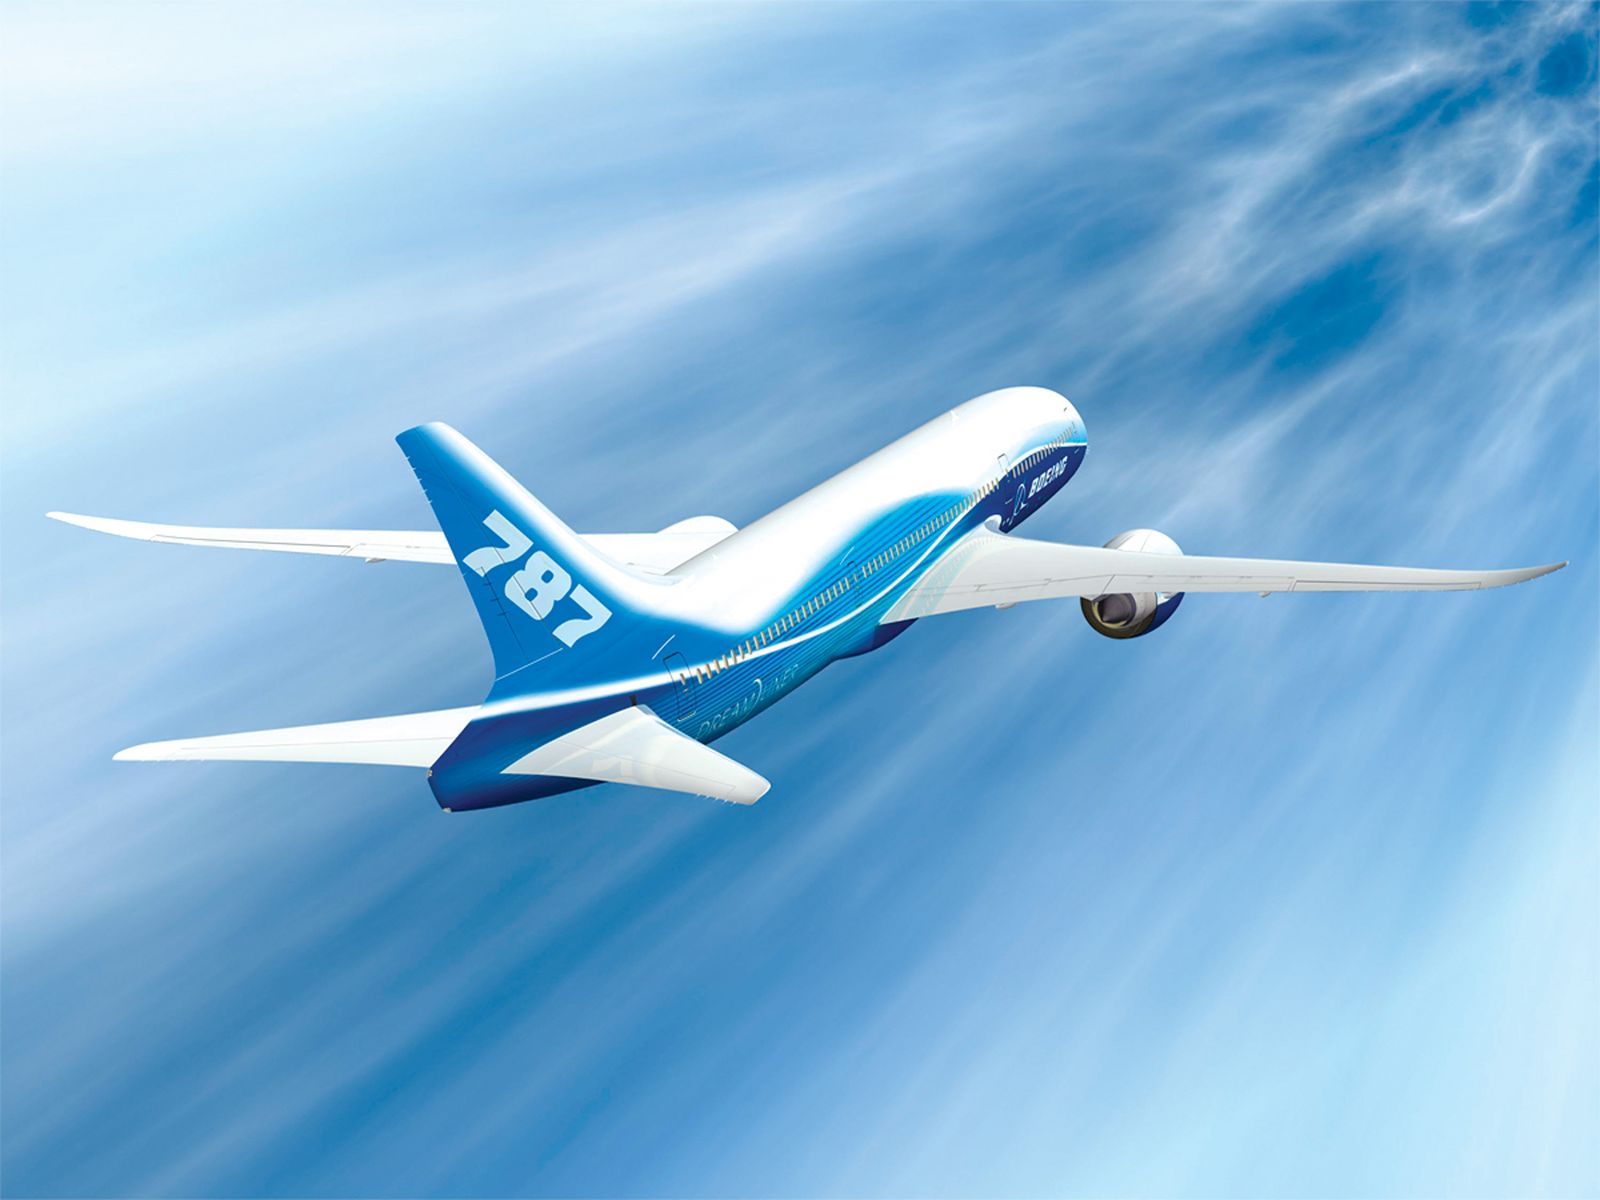 Boeing Desktop Wallpaper For HD Widescreen And Mobile